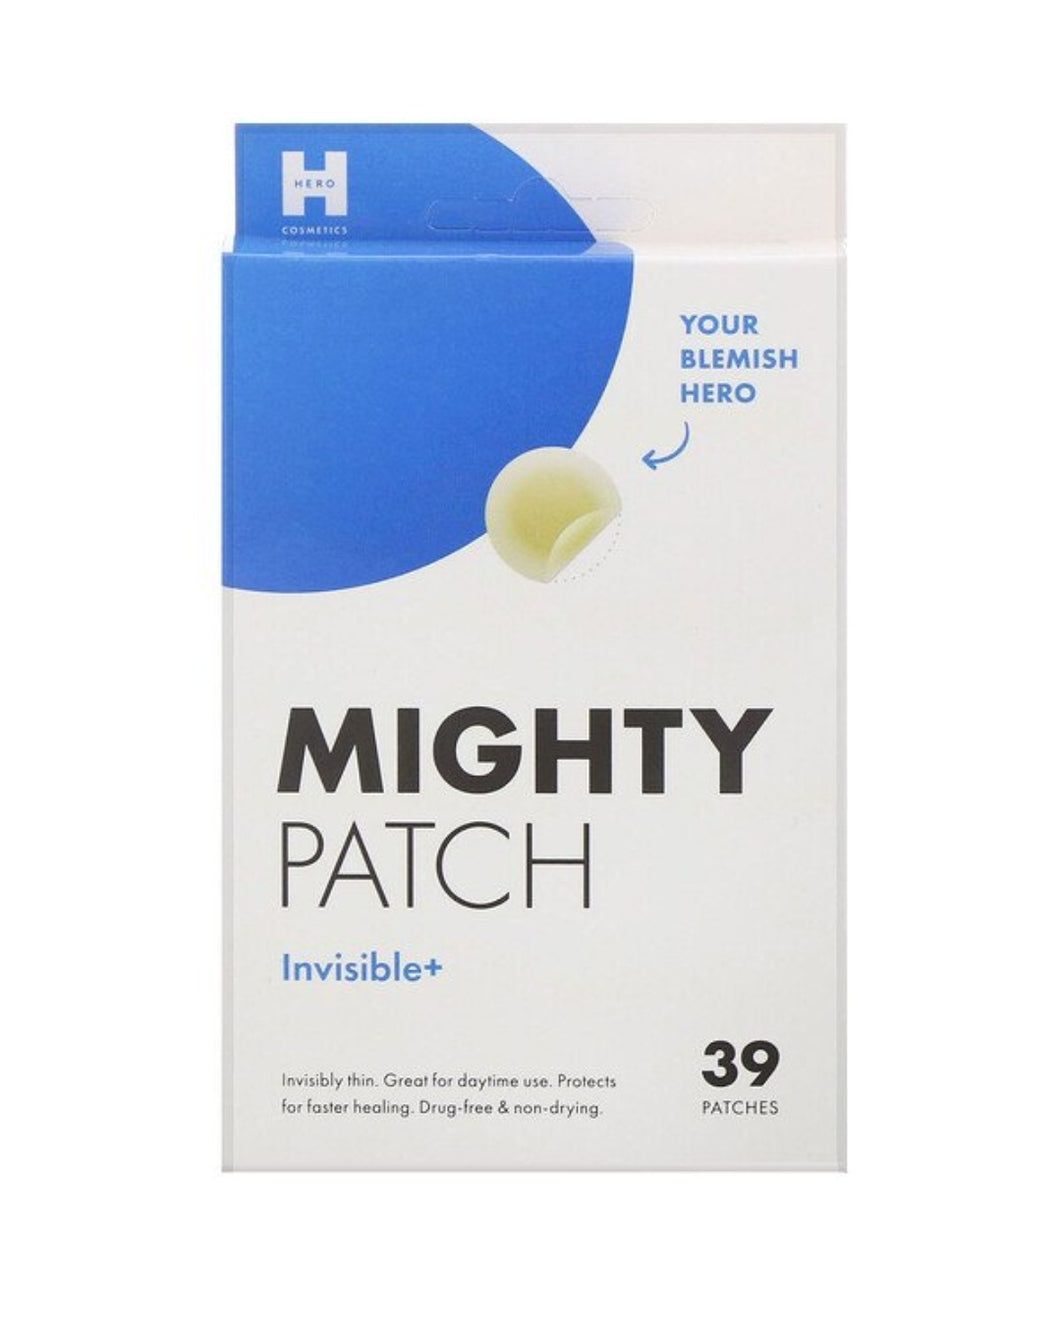 Invisible mighty patch